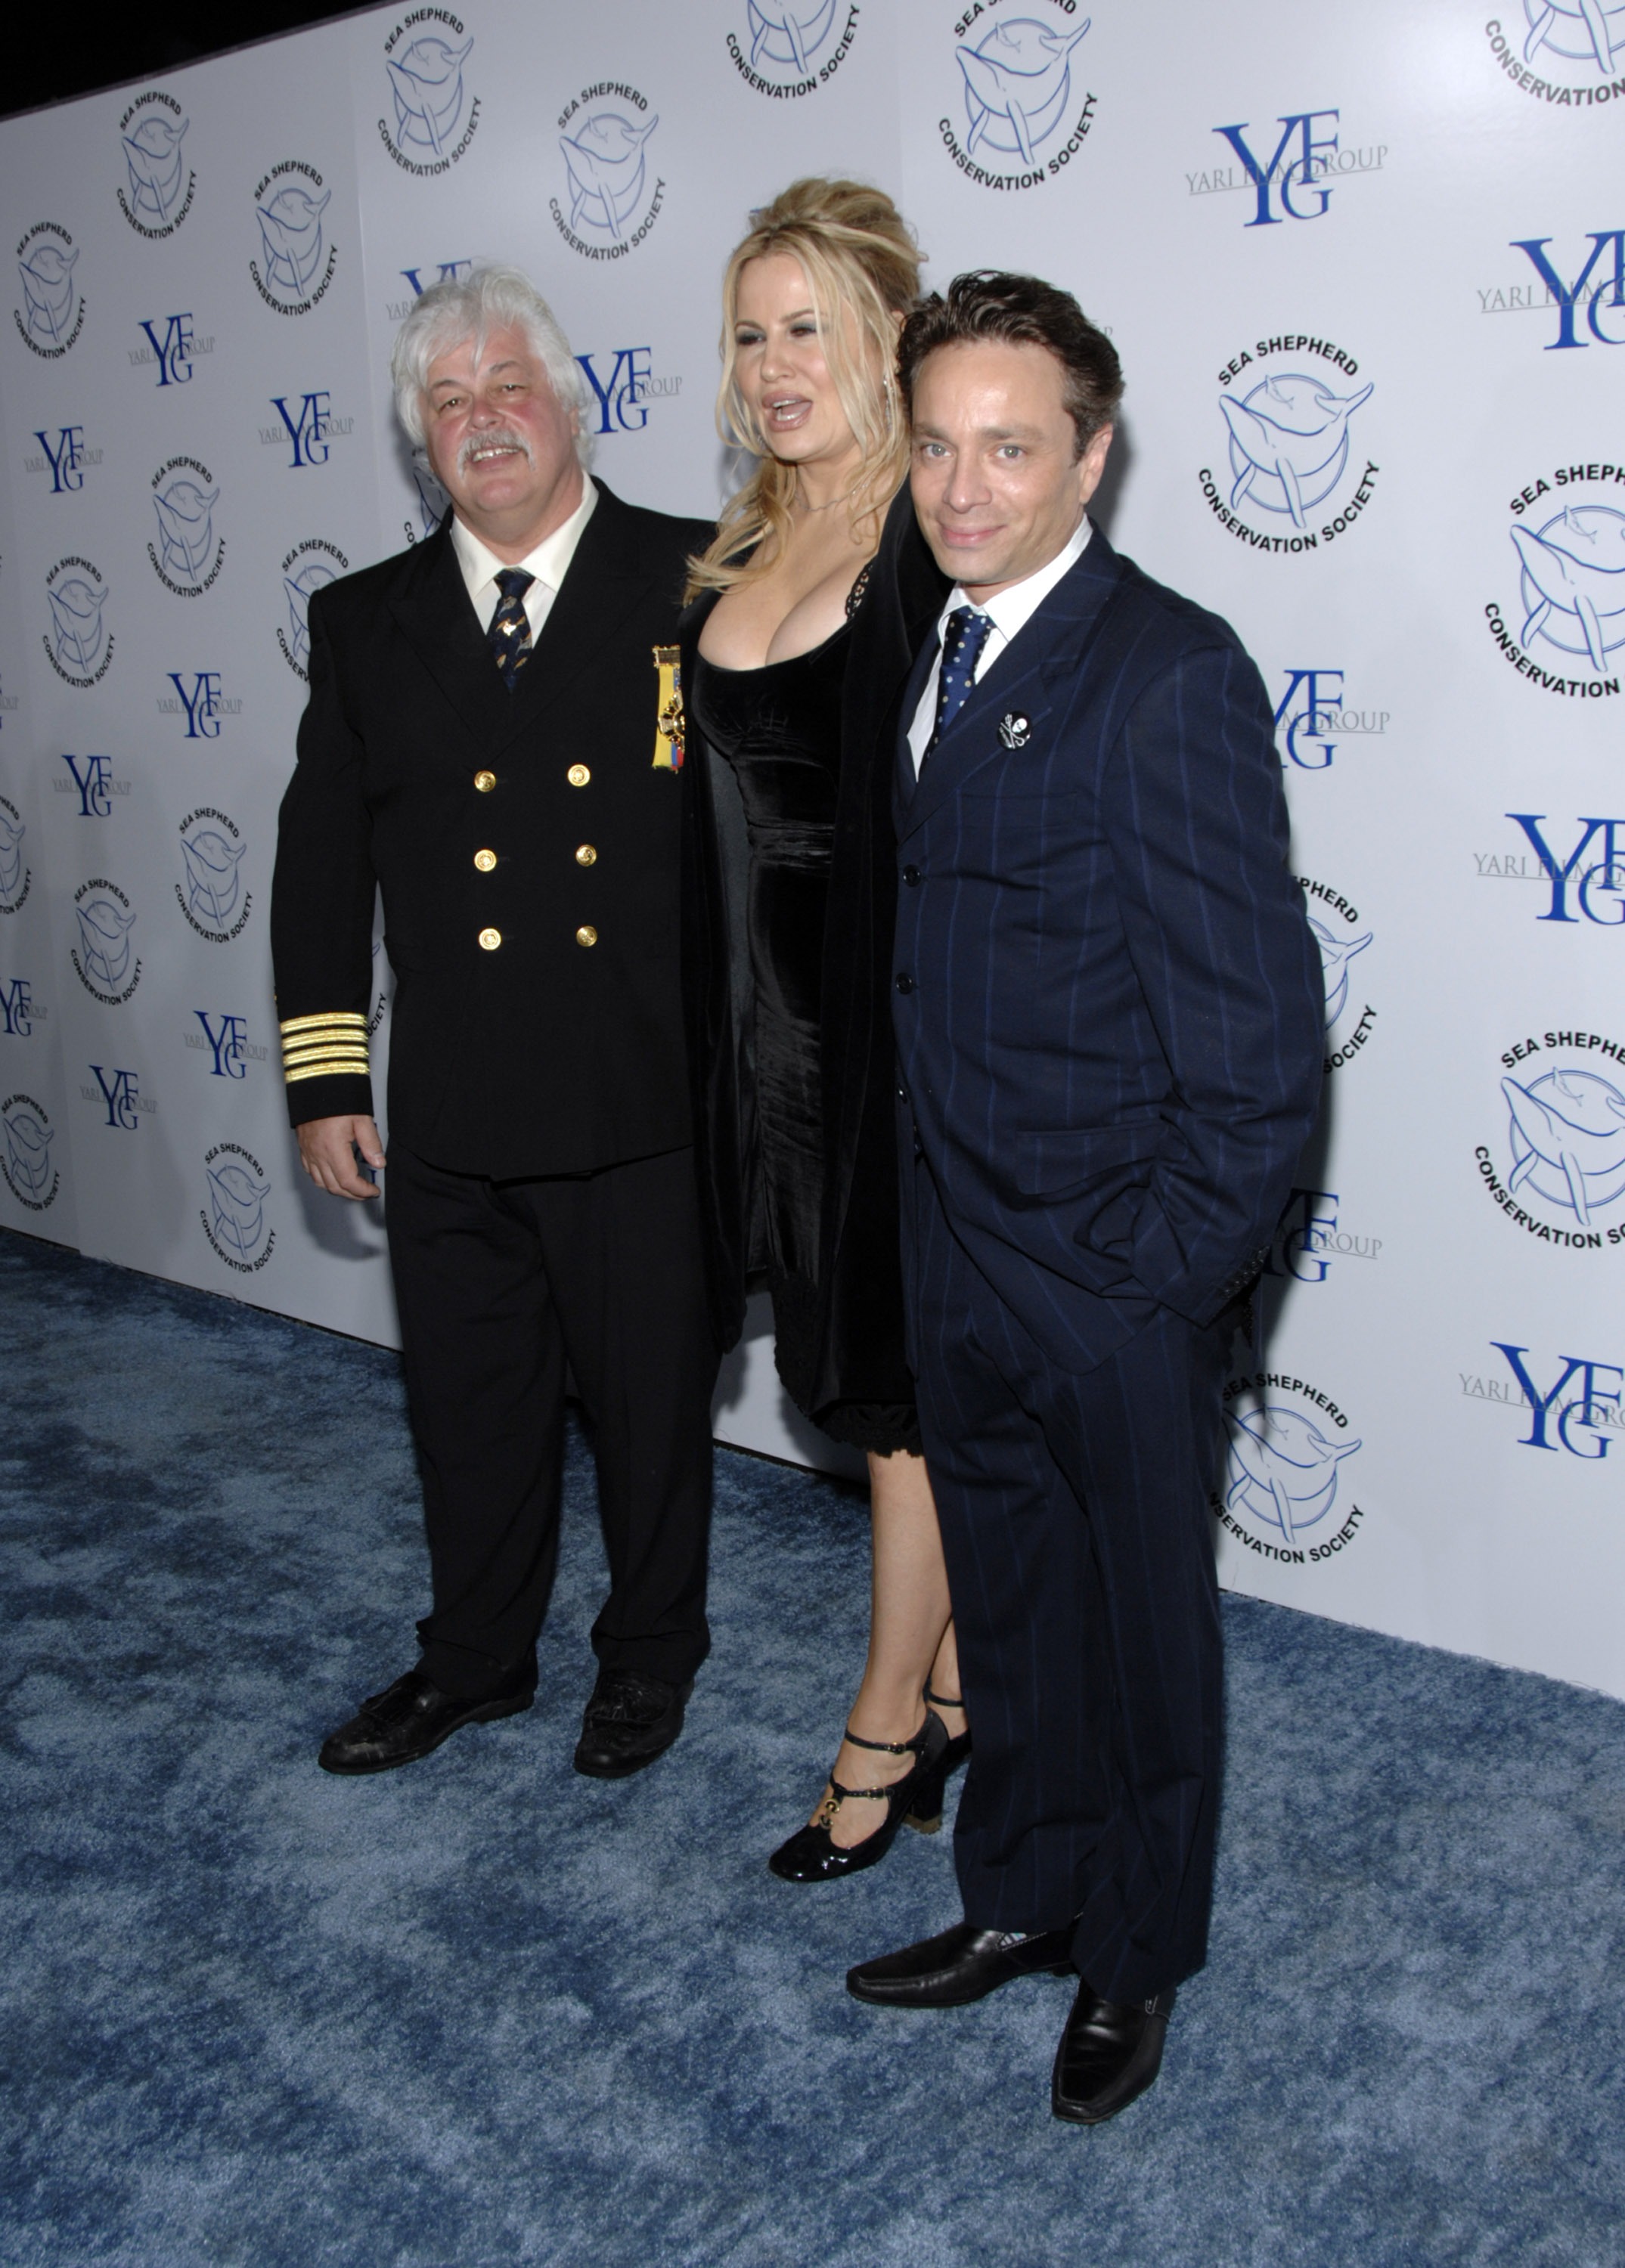 Captain Paul Watson, Founder of The Sea Shepherd Conservation Society, Jennifer Coolidge, and Chris Kattan at the "Breaking The Ice" fundraiser for the benefit of The Sea Shepherd Conservation Society on October 13, 2007 in Santa Monica, California | Source: Getty Images